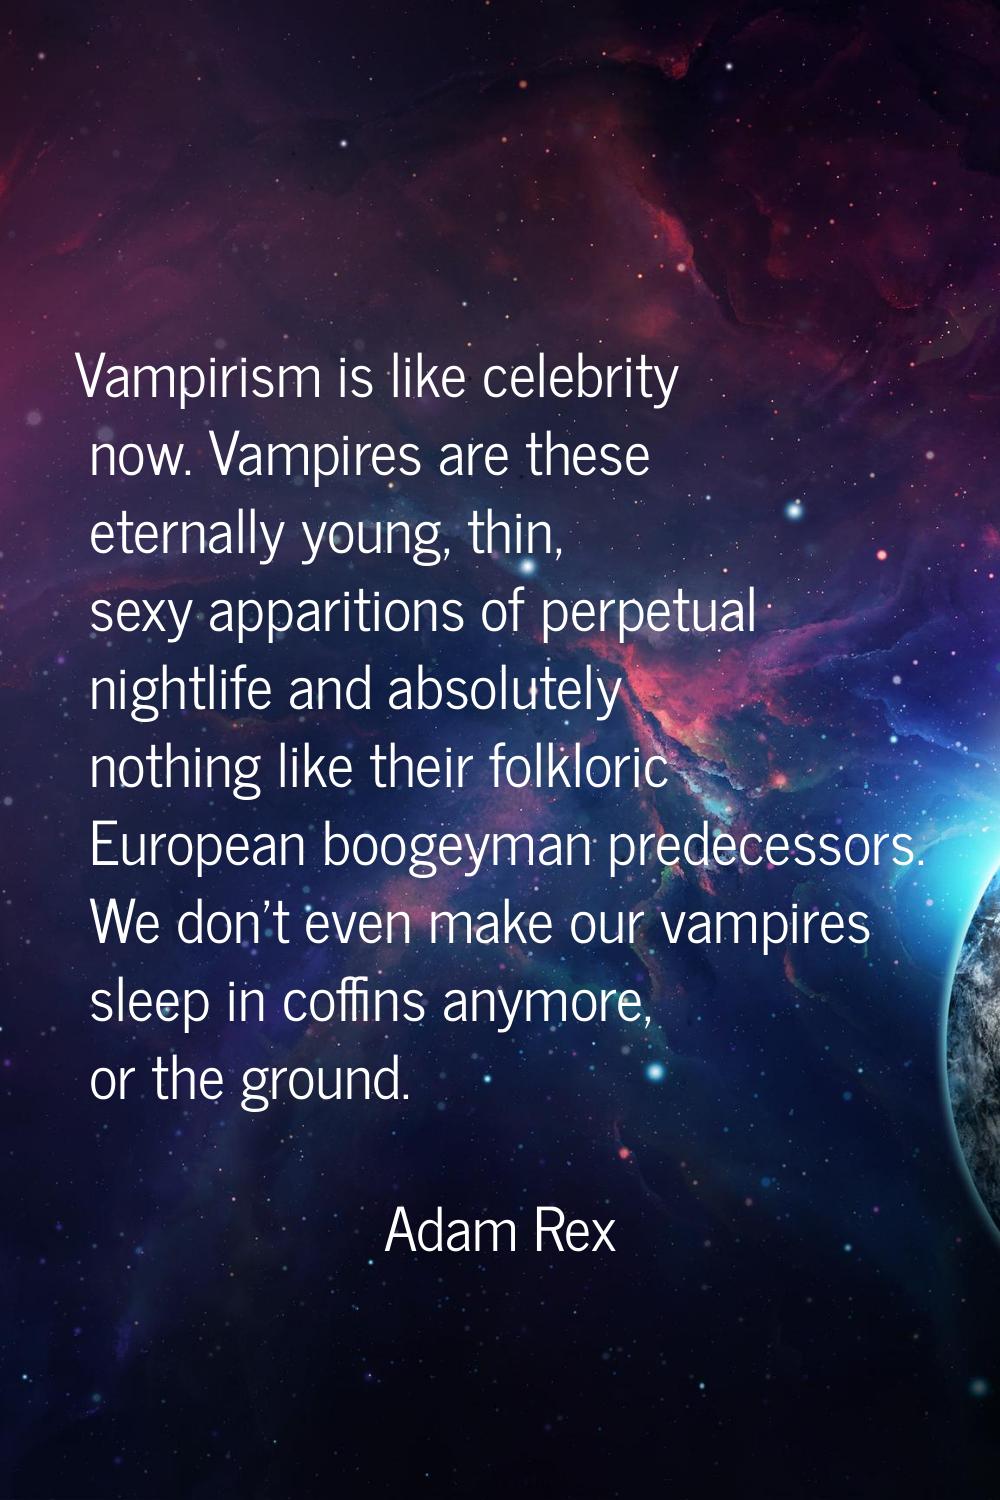 Vampirism is like celebrity now. Vampires are these eternally young, thin, sexy apparitions of perp